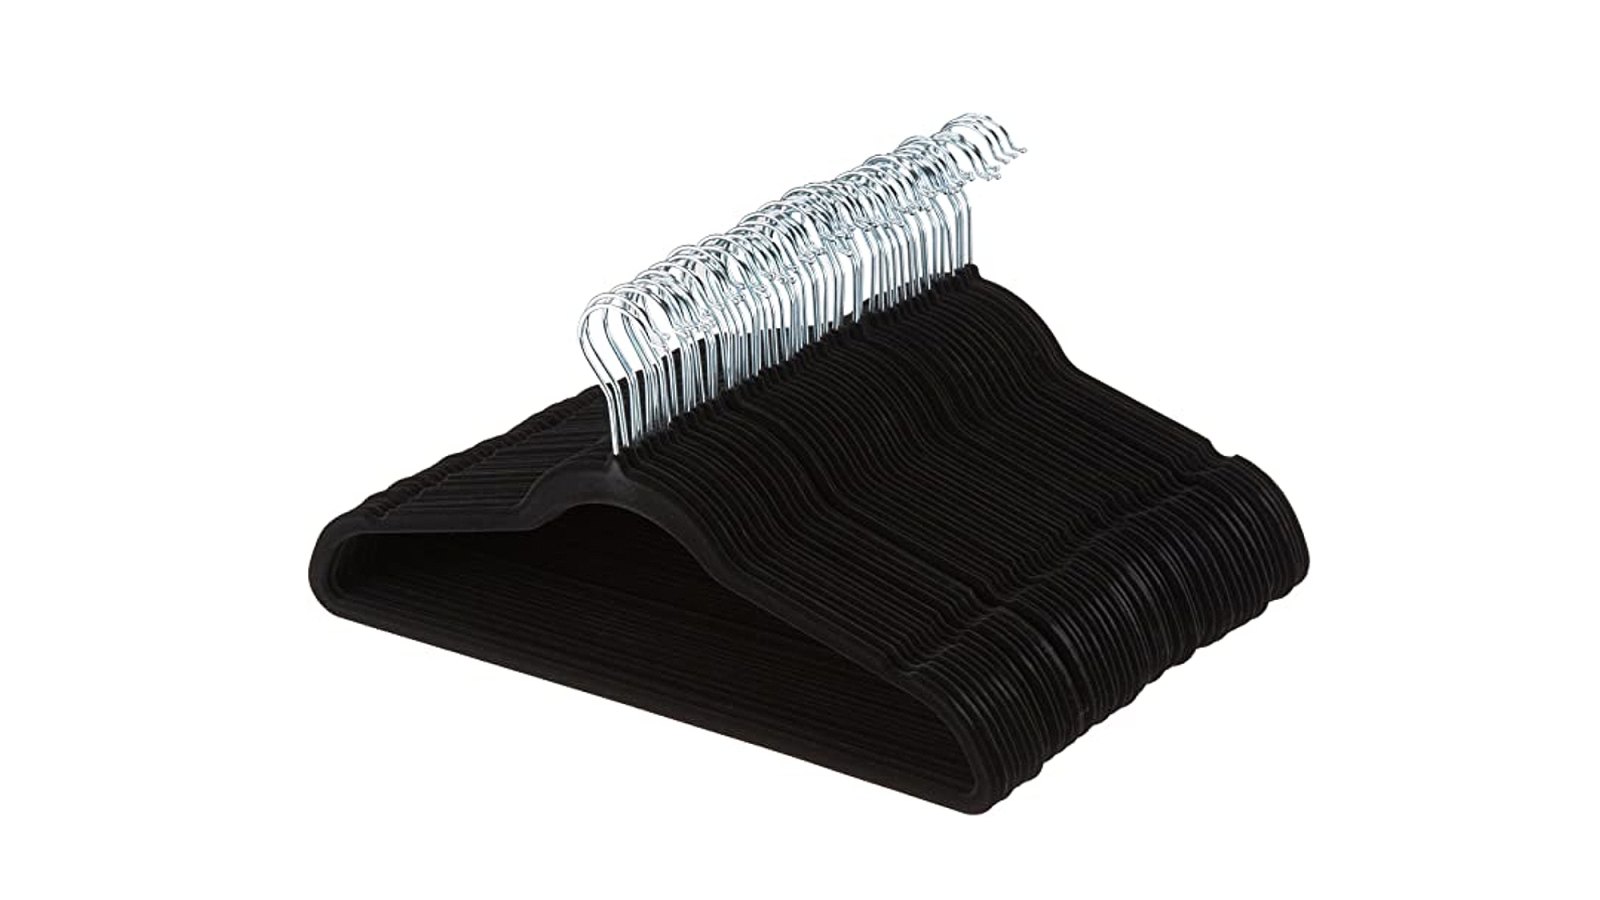 Prime Day Deals: These Bestselling Velvet Hangers Are 32% Off!